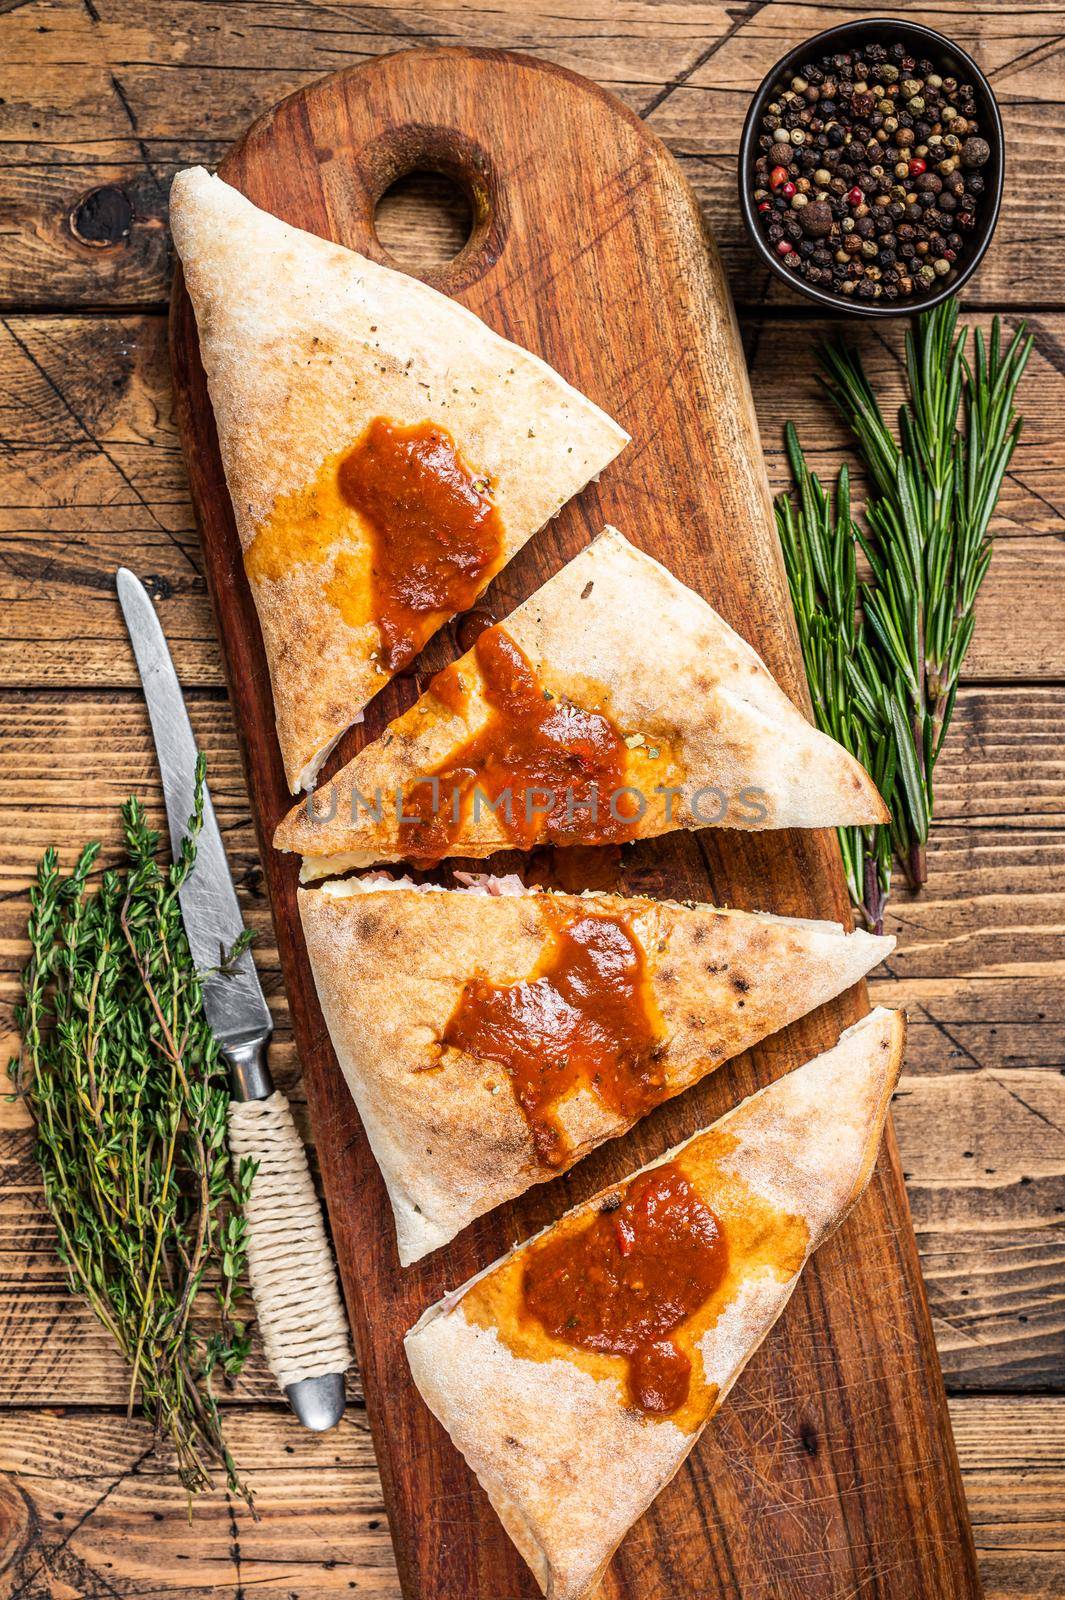 Cut and sliced Calzone closed pizza with ham and cheese on wooden board with hot tomato sauce. wooden background. Top view by Composter